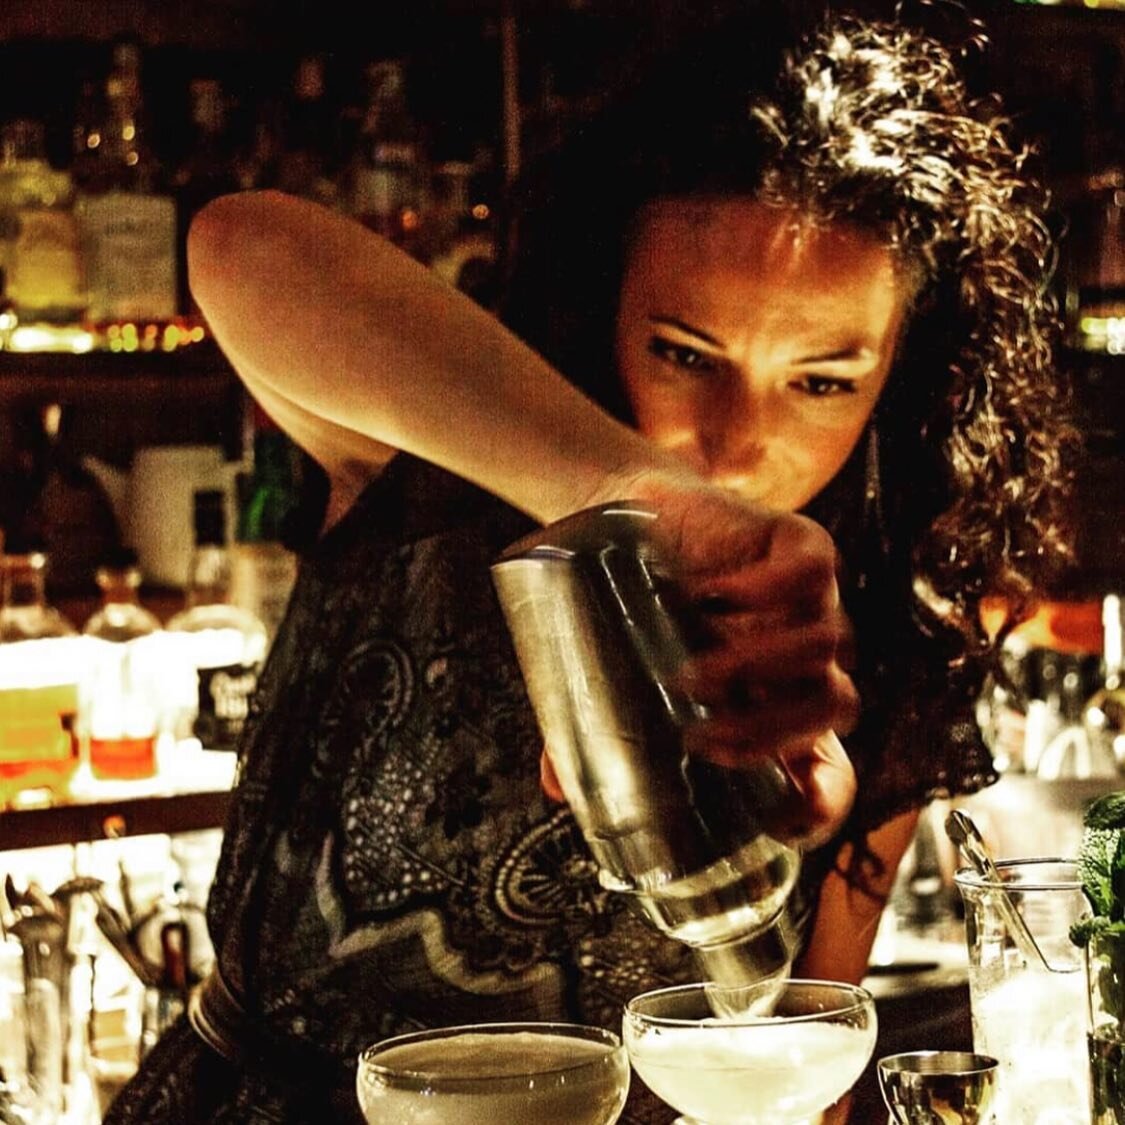 Valeria Bassetti has spent half her life behind bars....🍸cocktail bars, that is! 🔗LINK IN BIO to read the story in sharlafied.com 
.
.
.

#drinkstagram #drinks #cocktails #mixology #cocktail #drink #bartender #bar #craftcocktails #cocktailsofinstag